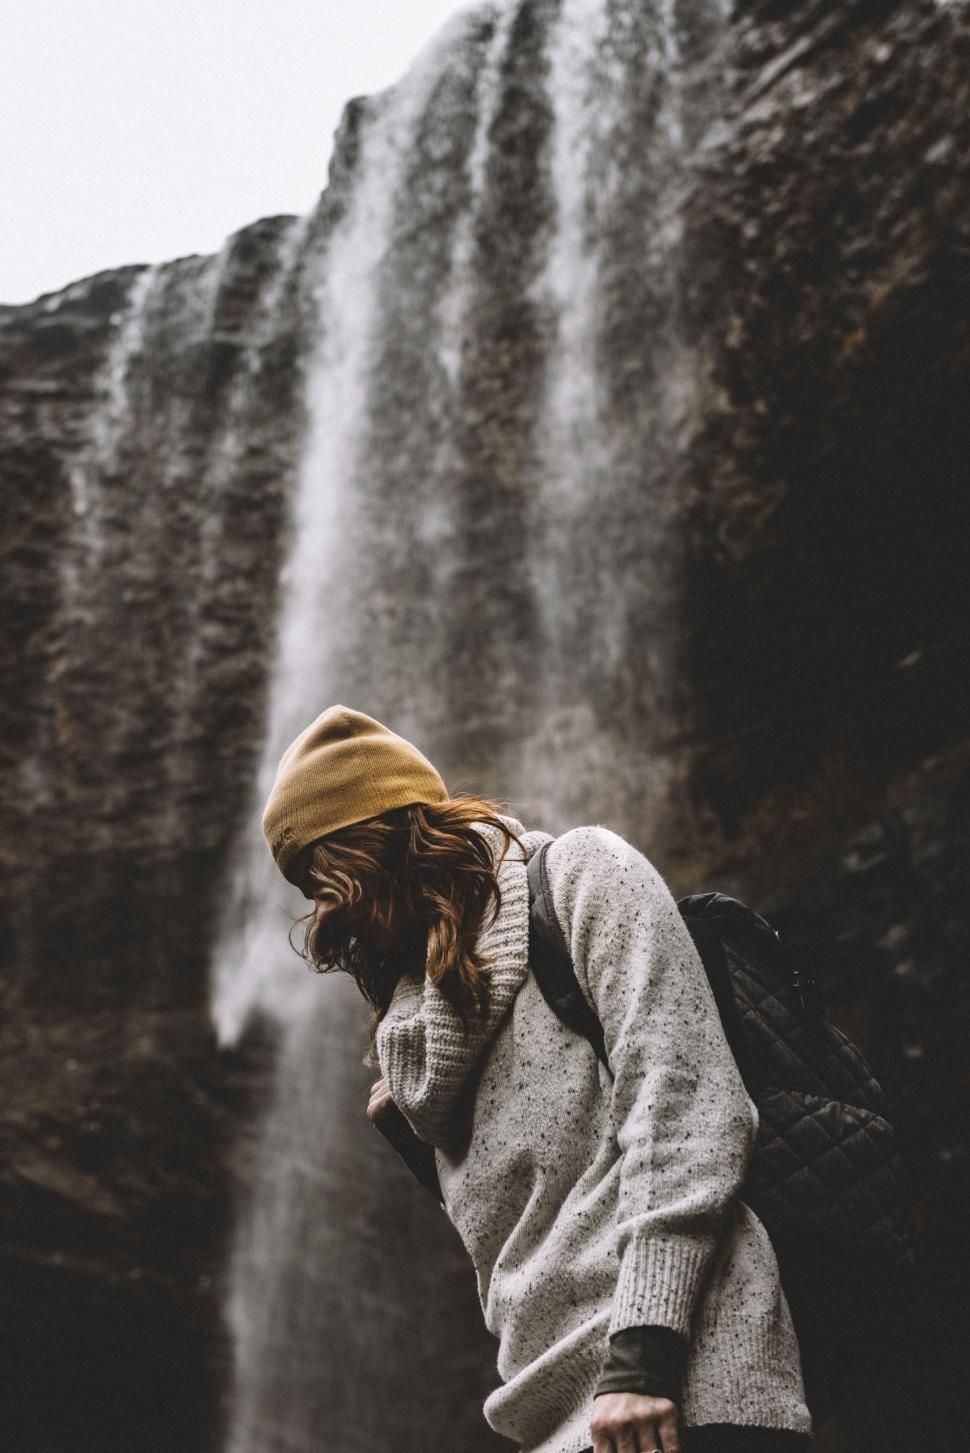 Free Image of Woman Standing in Front of Waterfall 